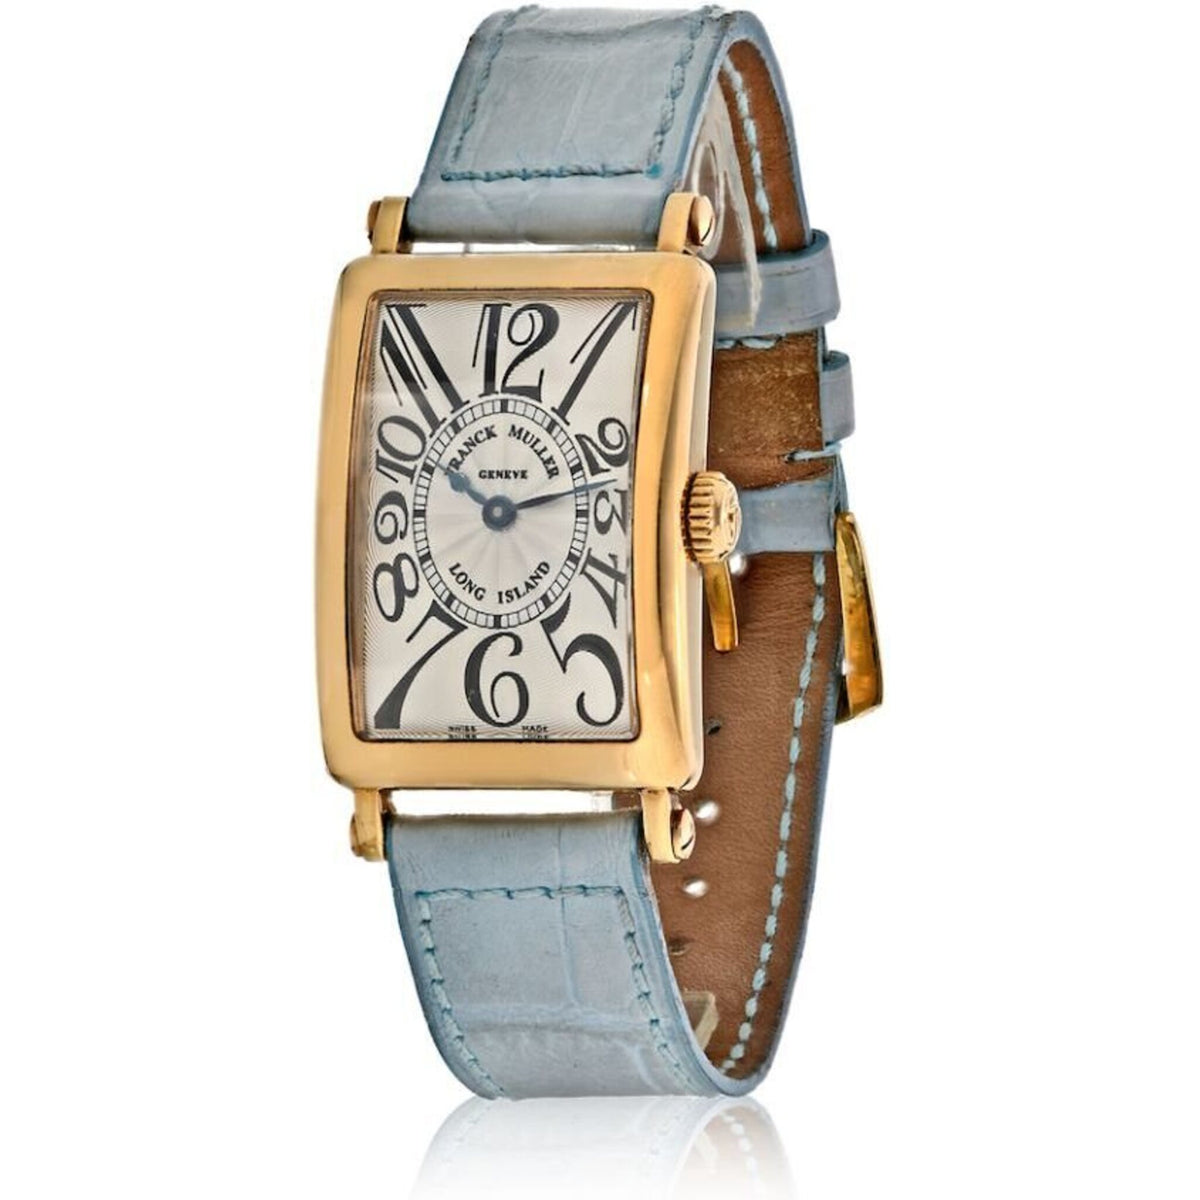 Franck Muller - 18K Yellow Gold Long Island Master of Complications Light Blue Leather Strap Ladies Watch